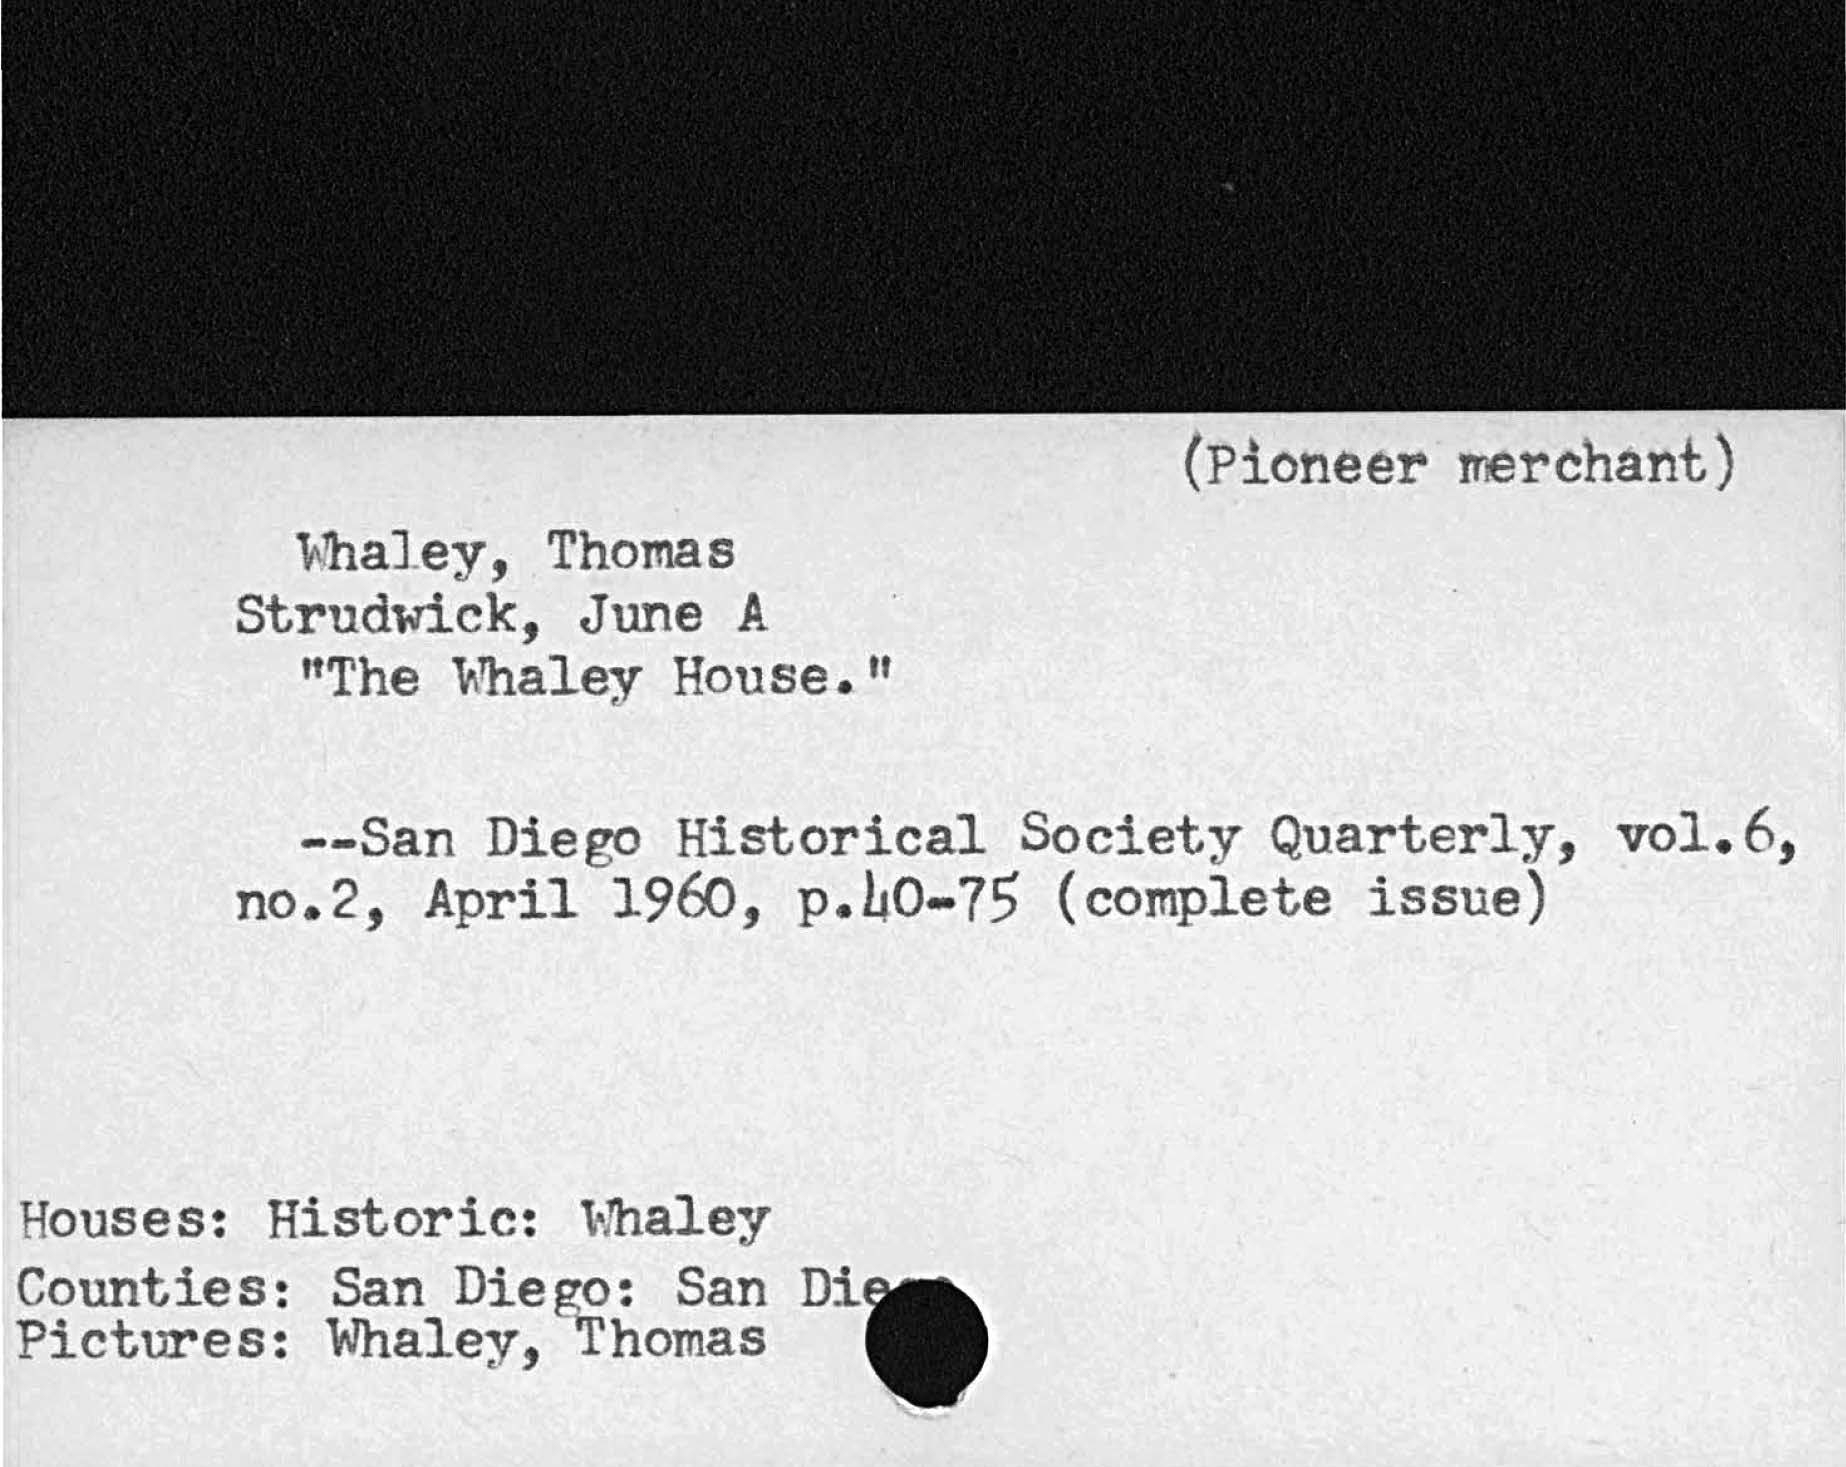 Pioneer merchantWhaley ThomasStrudwick, June AThe Whaley House.San Diego Historical Society Quarterly, vol. 6,no. 2, April 196o, p. 40- 75 complete issueHouses:  Historic:  WhaleyCounties:  San Diego:  San DiPictures:  Whaley, Thomas